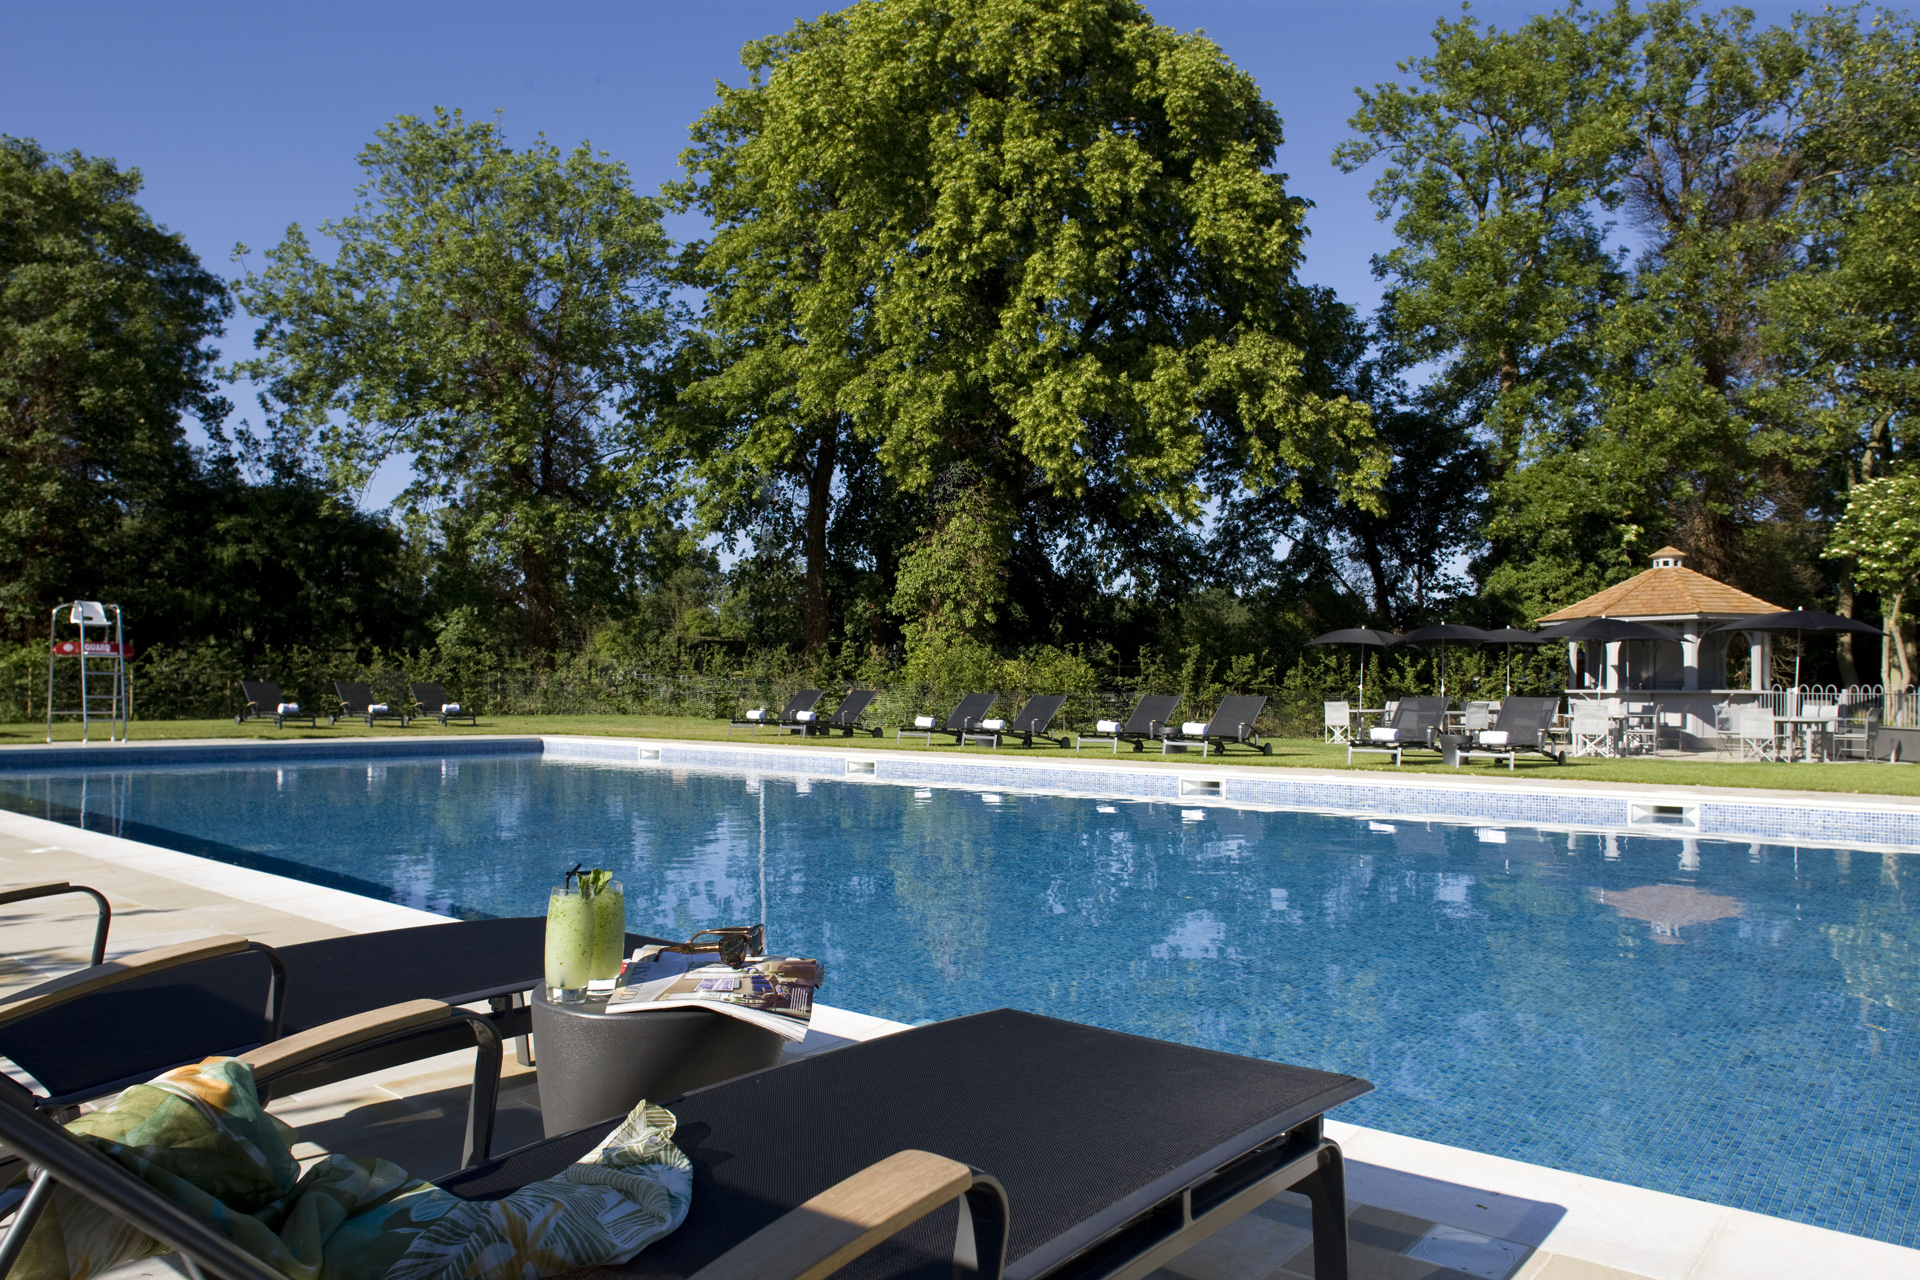 The seasonally heated outdoor swimming pool at The Runnymede on Thames